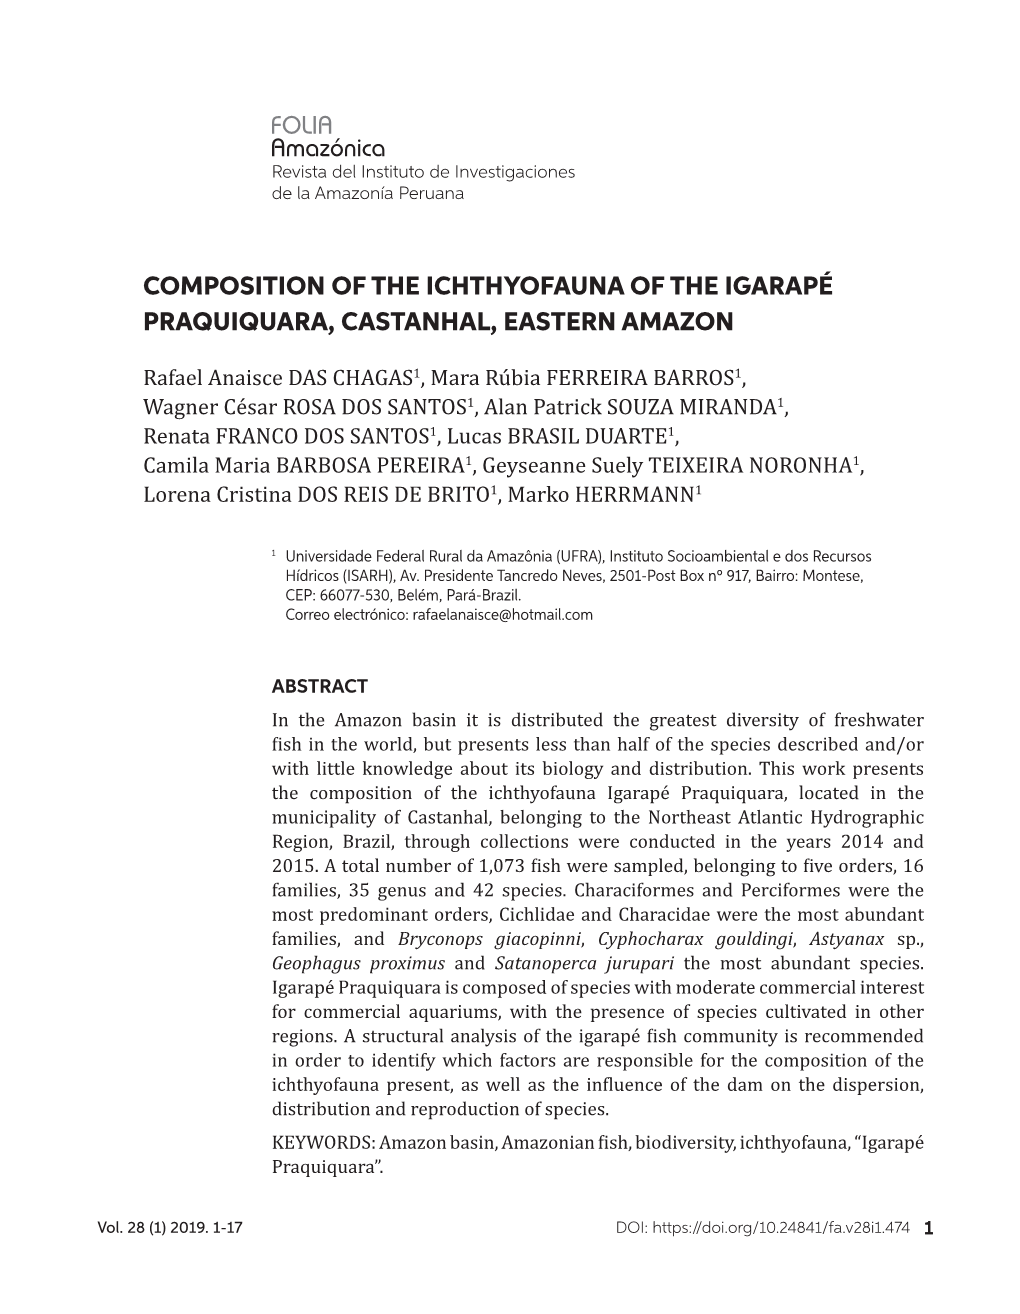 Composition of the Ichthyofauna of the Igarapé Praquiquara, Castanhal, Eastern Amazon